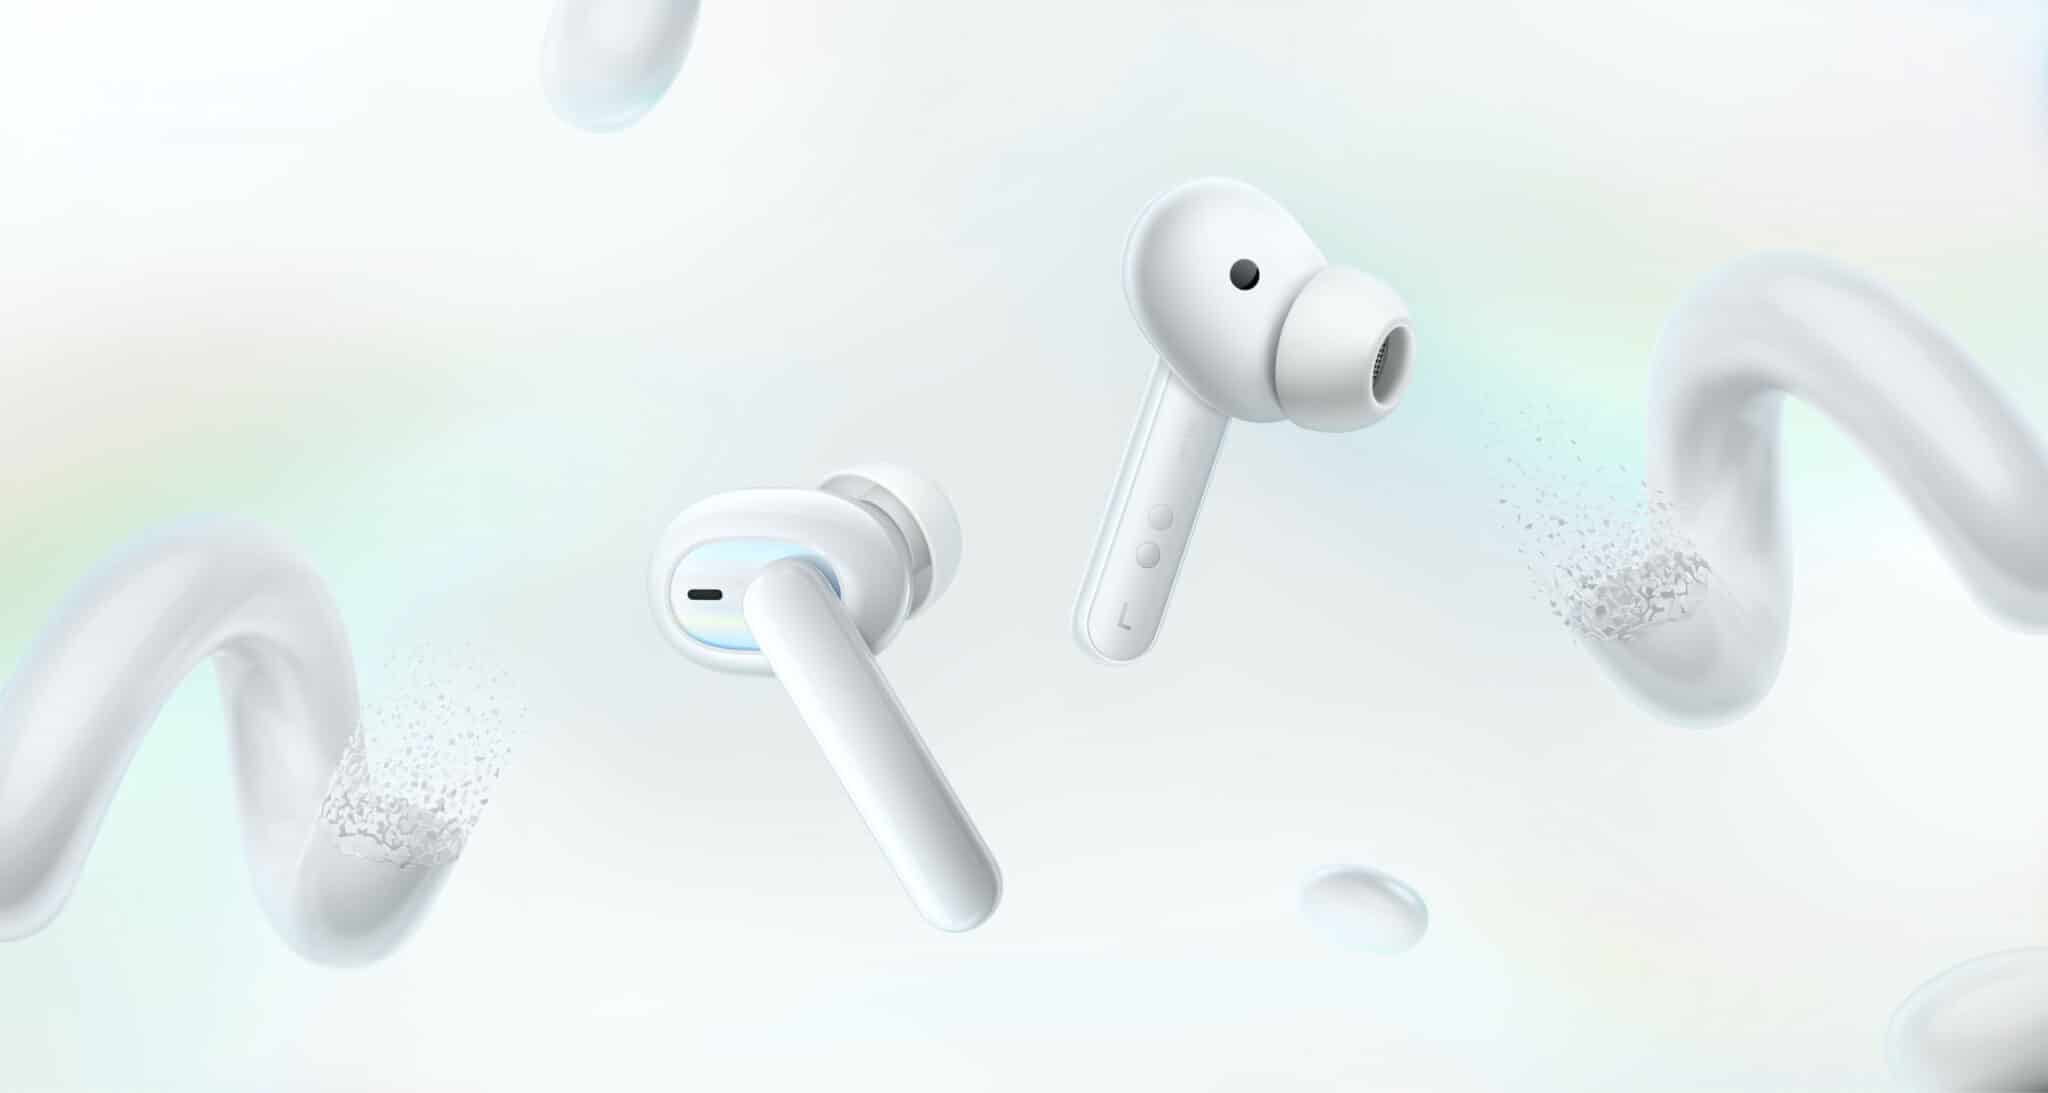 Oppo Launches Enco W51 Earbuds with Active Noise Cancellation and Wireless Charging